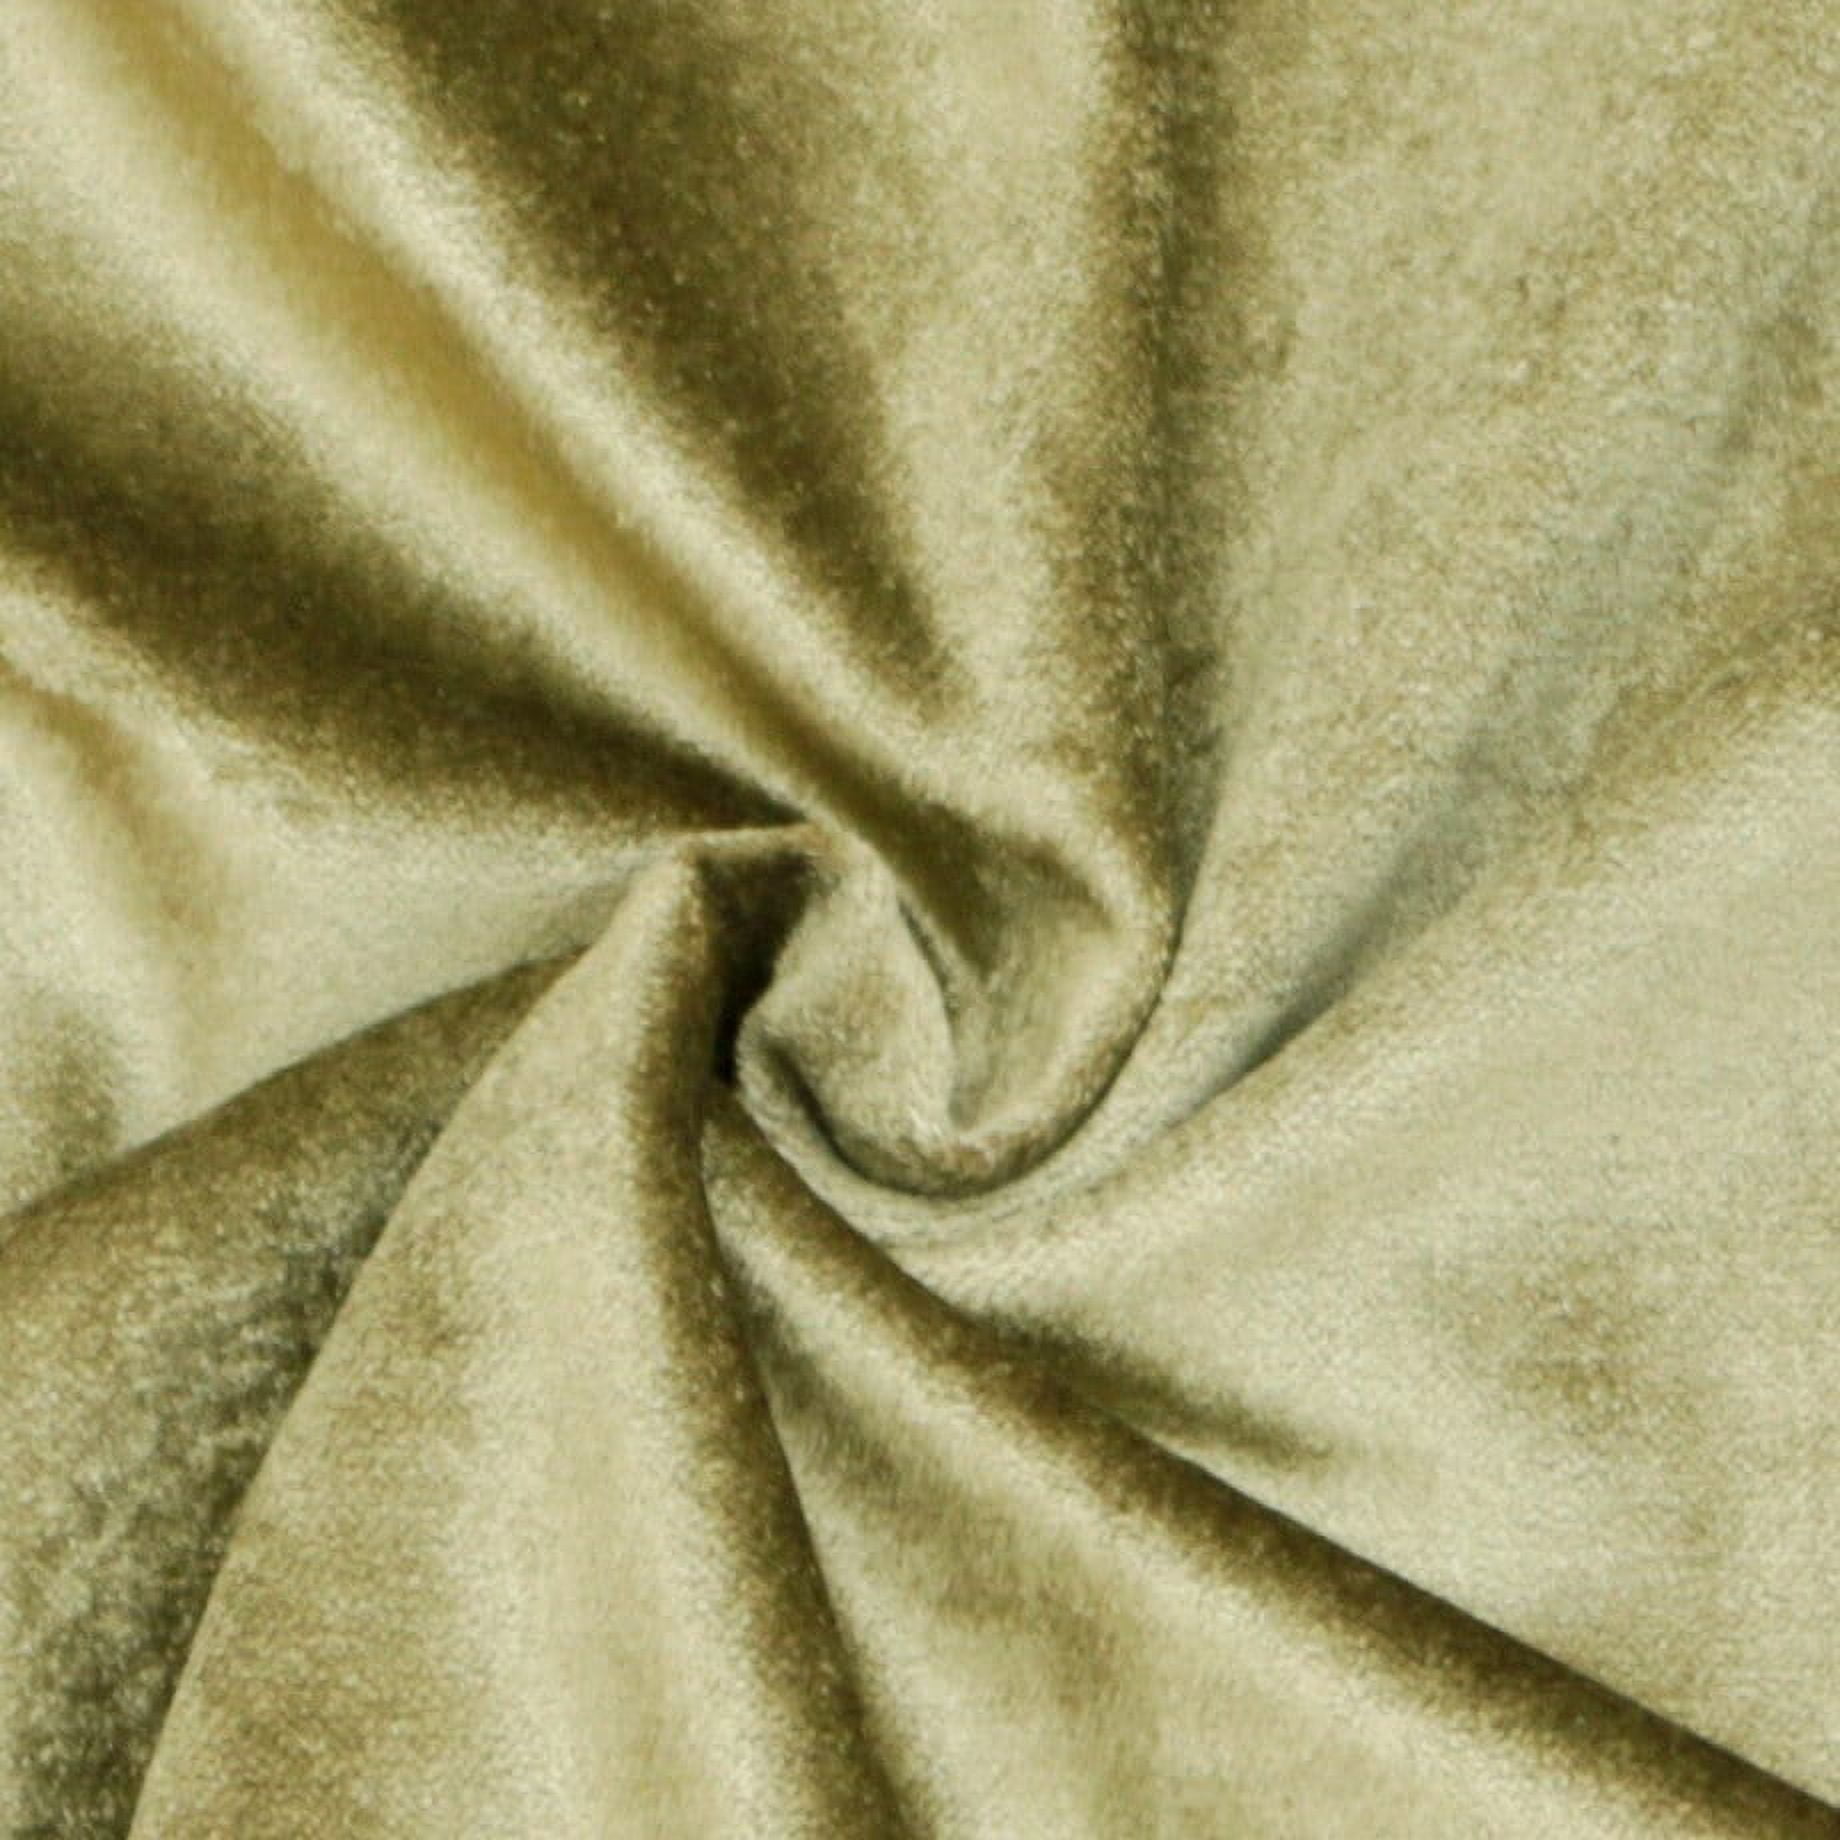 Fabric Mart Direct Sage Green Cotton Velvet Fabric By The Yard, 54 inches  or 137 cm width, 1 Yard Green Velvet Fabric, Upholstery Weight Curtain  Fabric, Wholesale Fabric, Fashion Velvet Fabric 